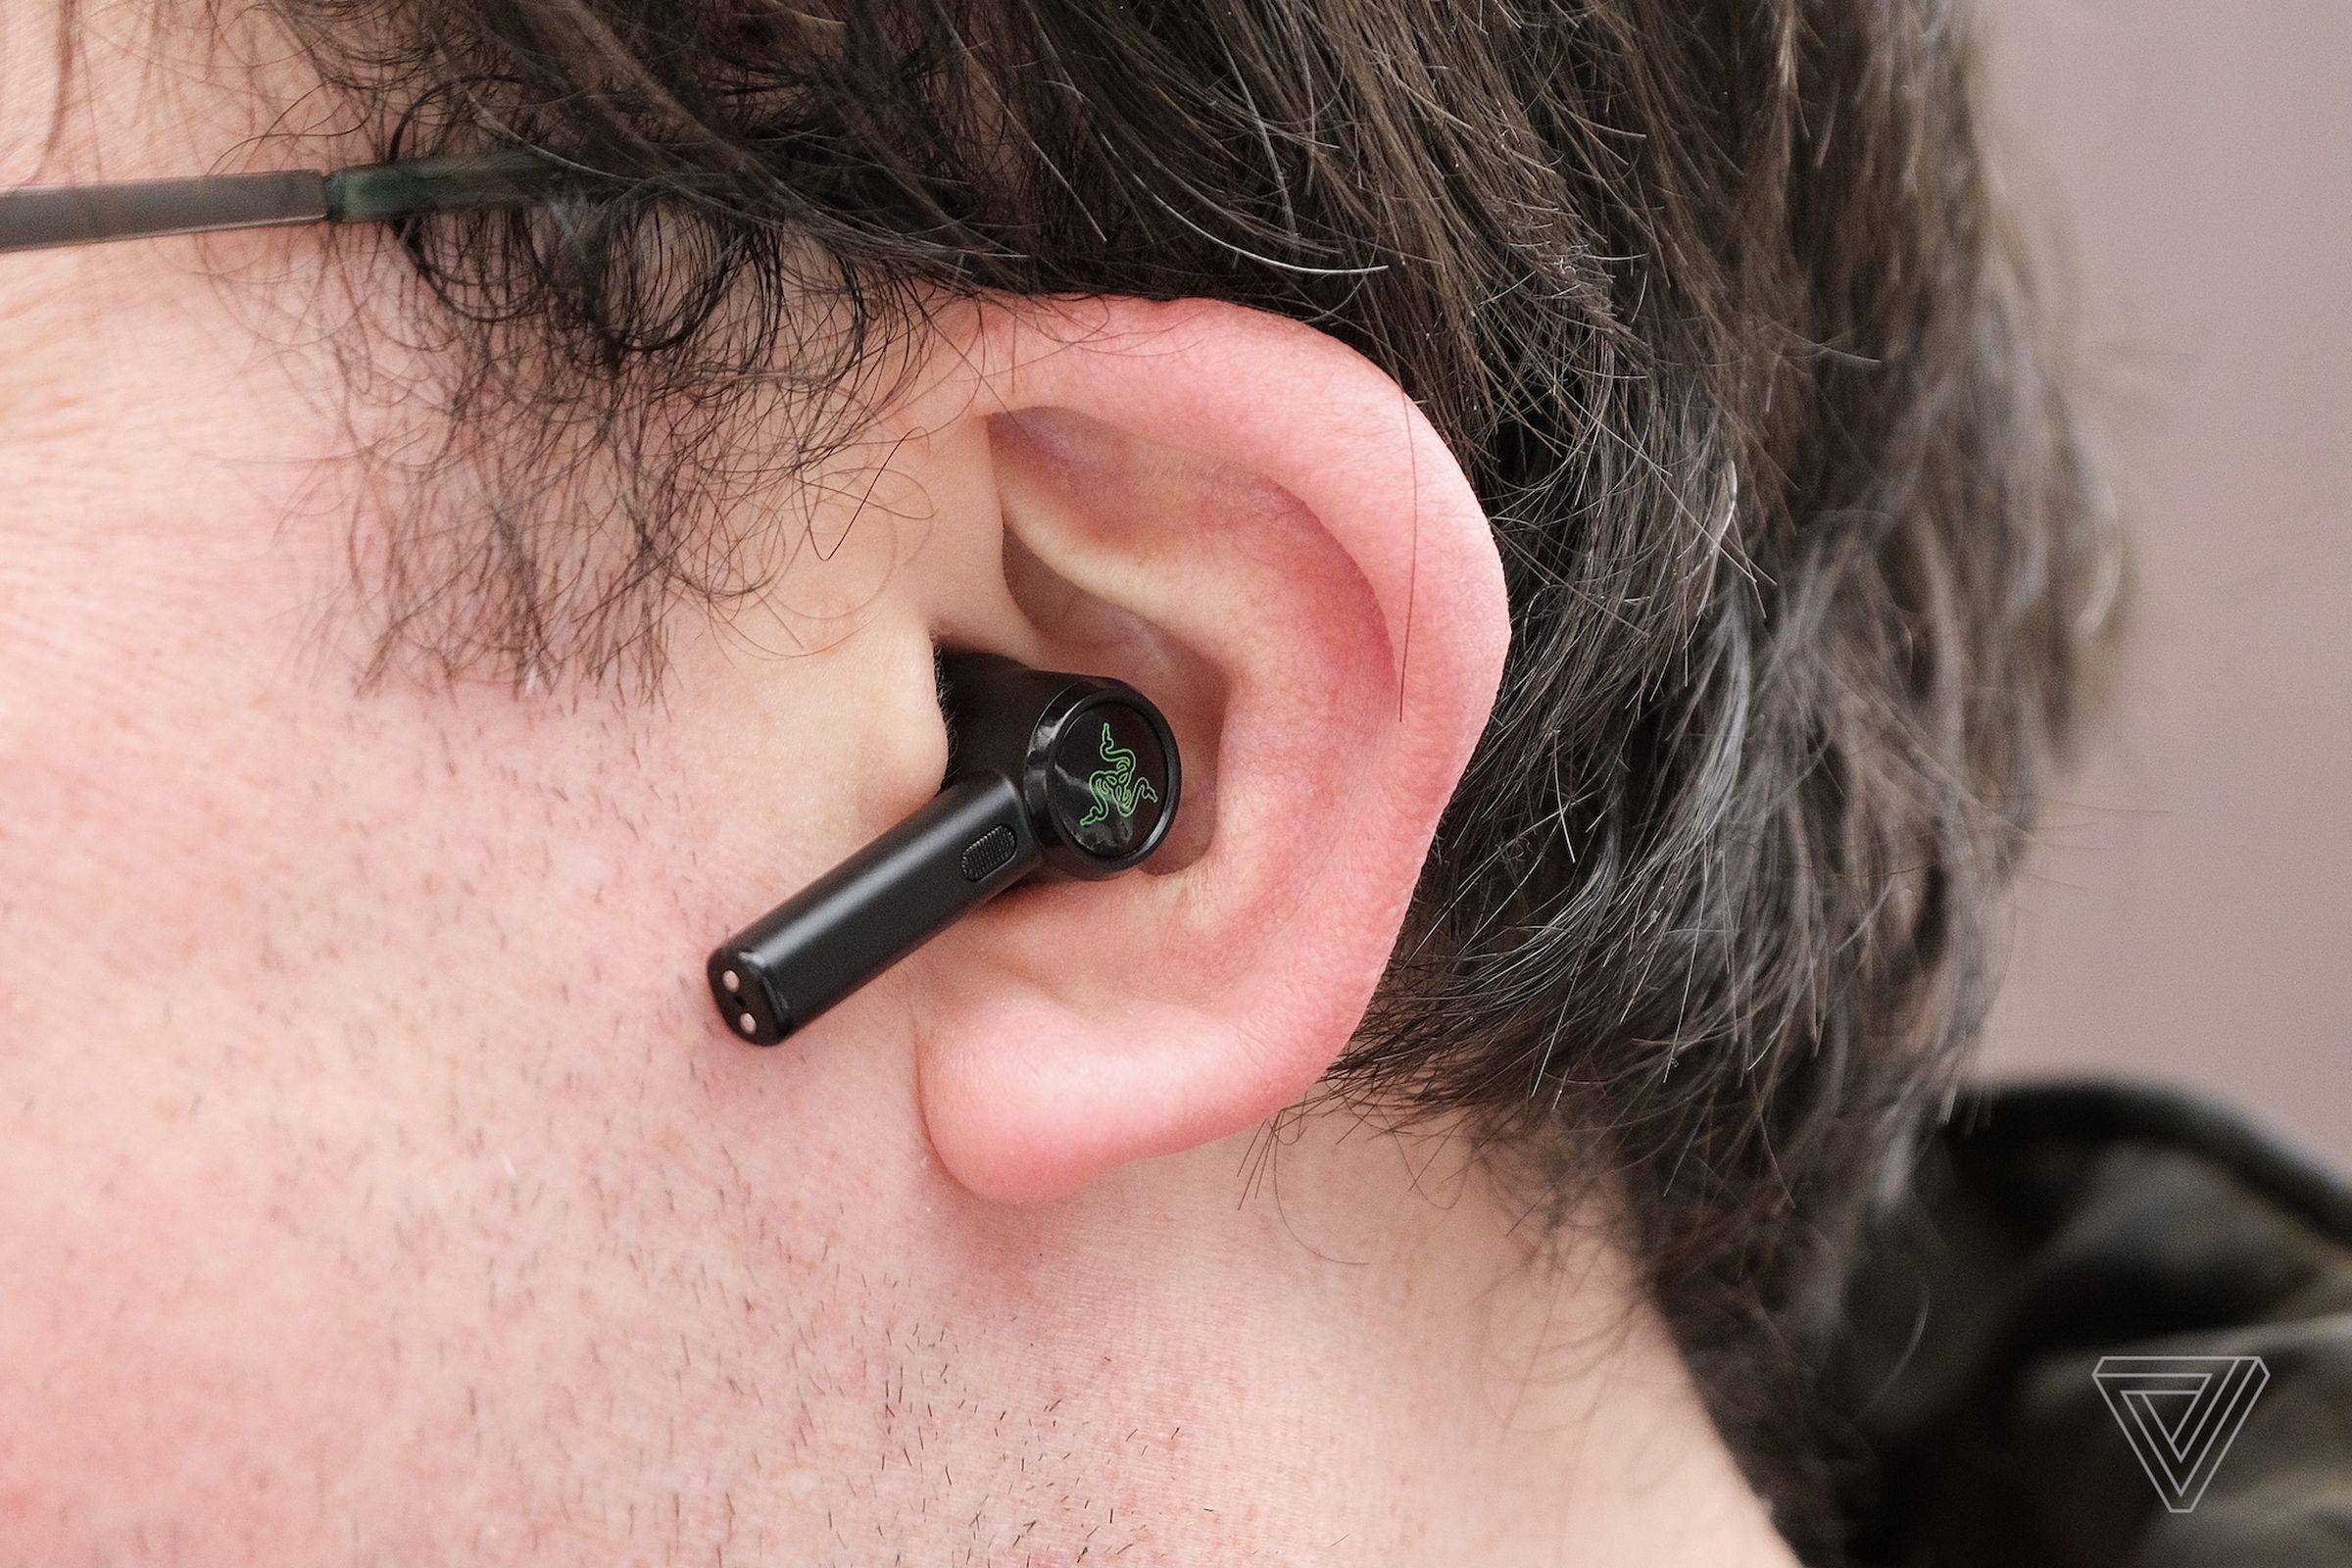 Thanks to a plethora of included ear tips, it’s easy to find a good, comfortable fit.